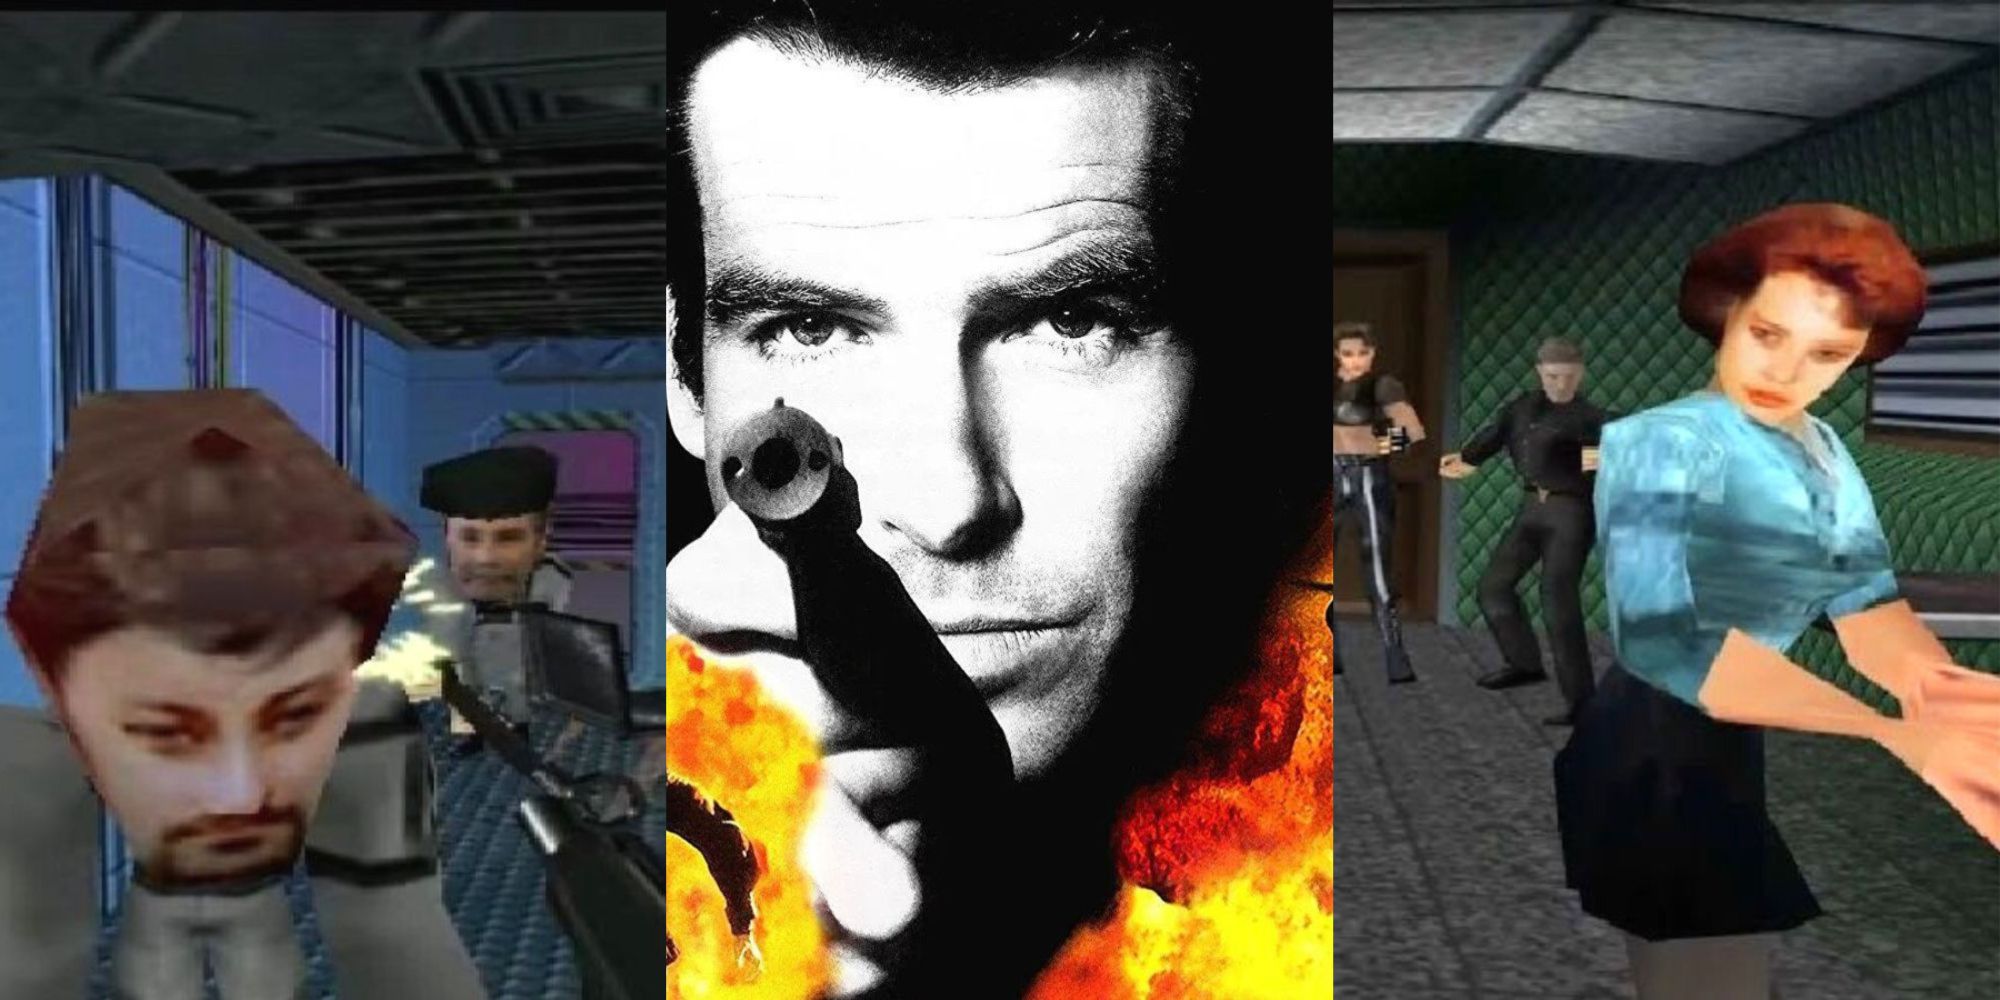 GoldenEye 007 is 20: raise a Martini to a classic N64 game - CNET